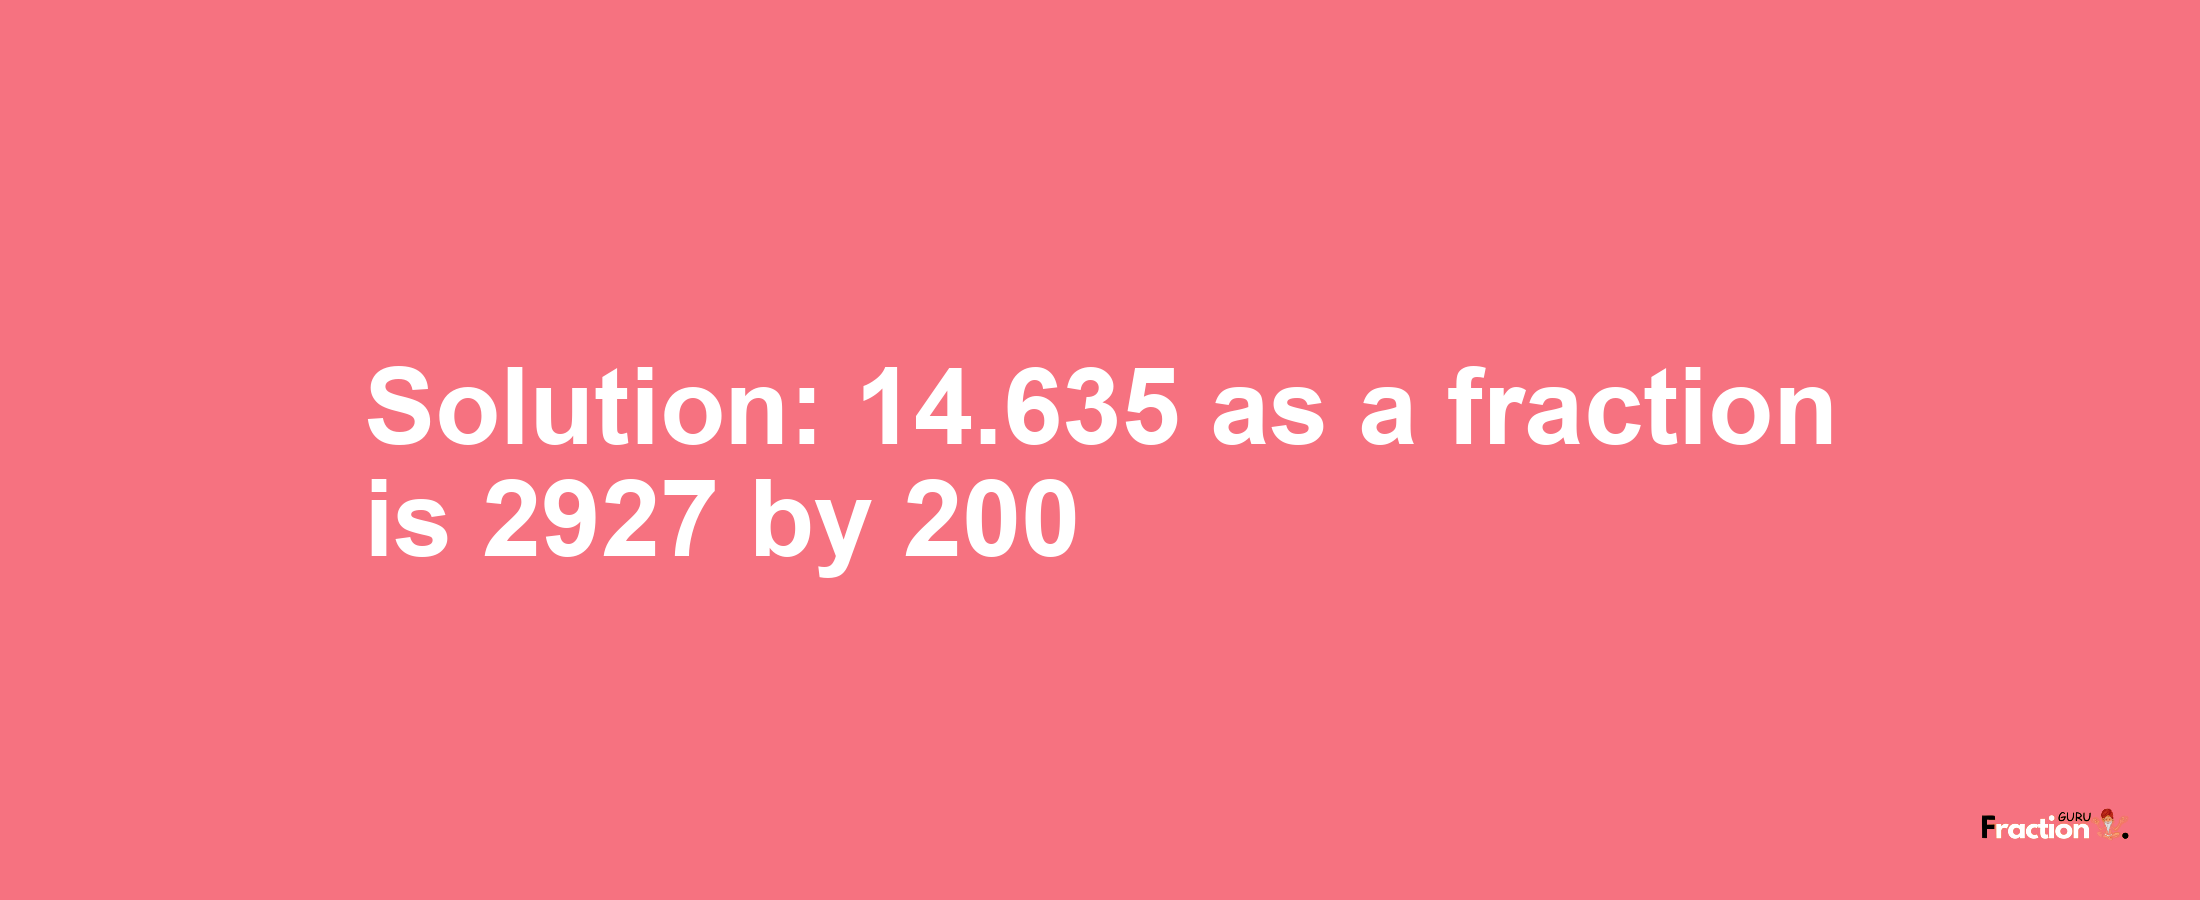 Solution:14.635 as a fraction is 2927/200